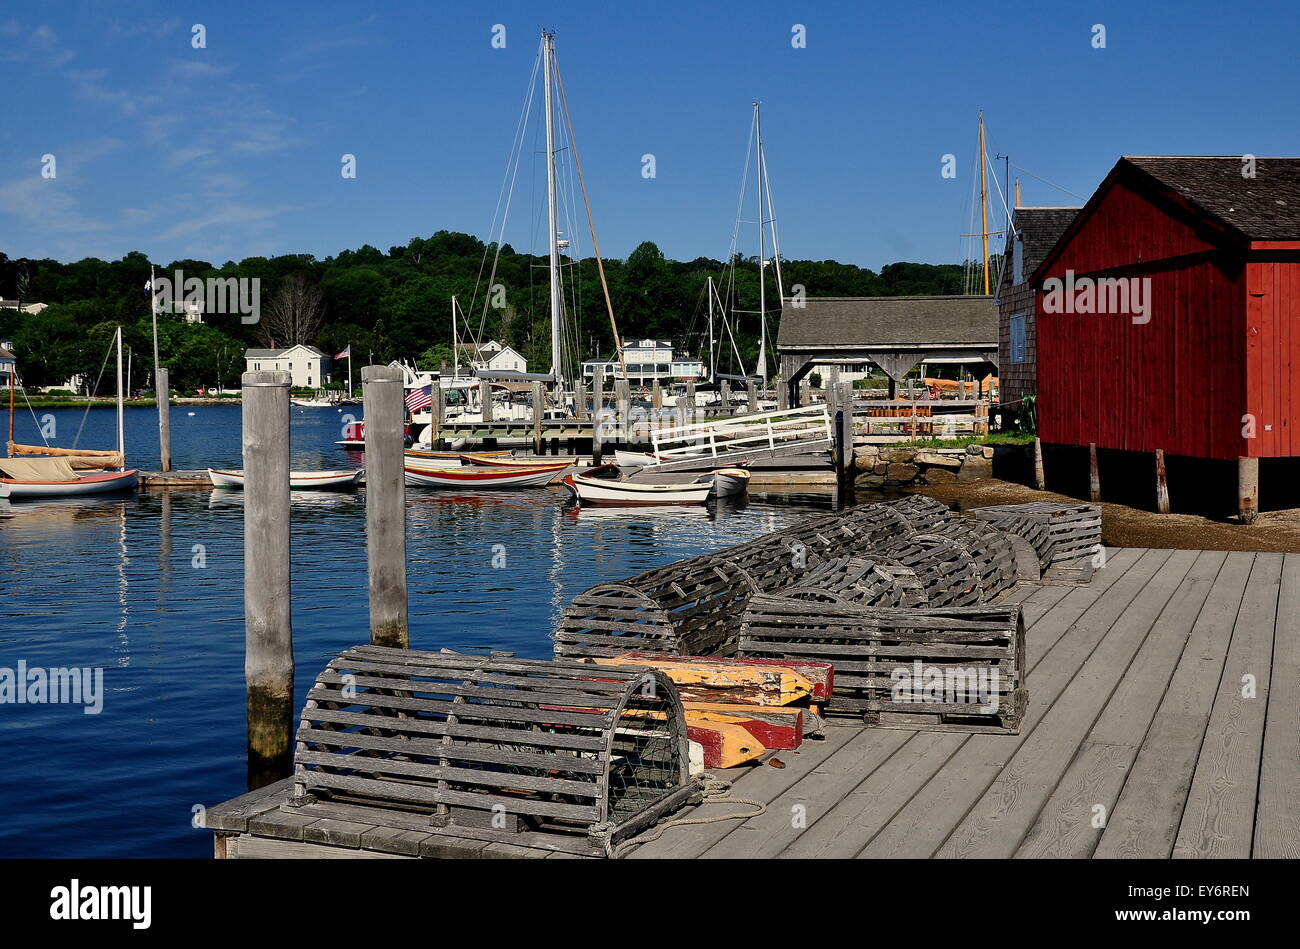 Mystic, Connecticut:  Empty lobster traps sit on a wooden pier at Mystic Seaport Stock Photo